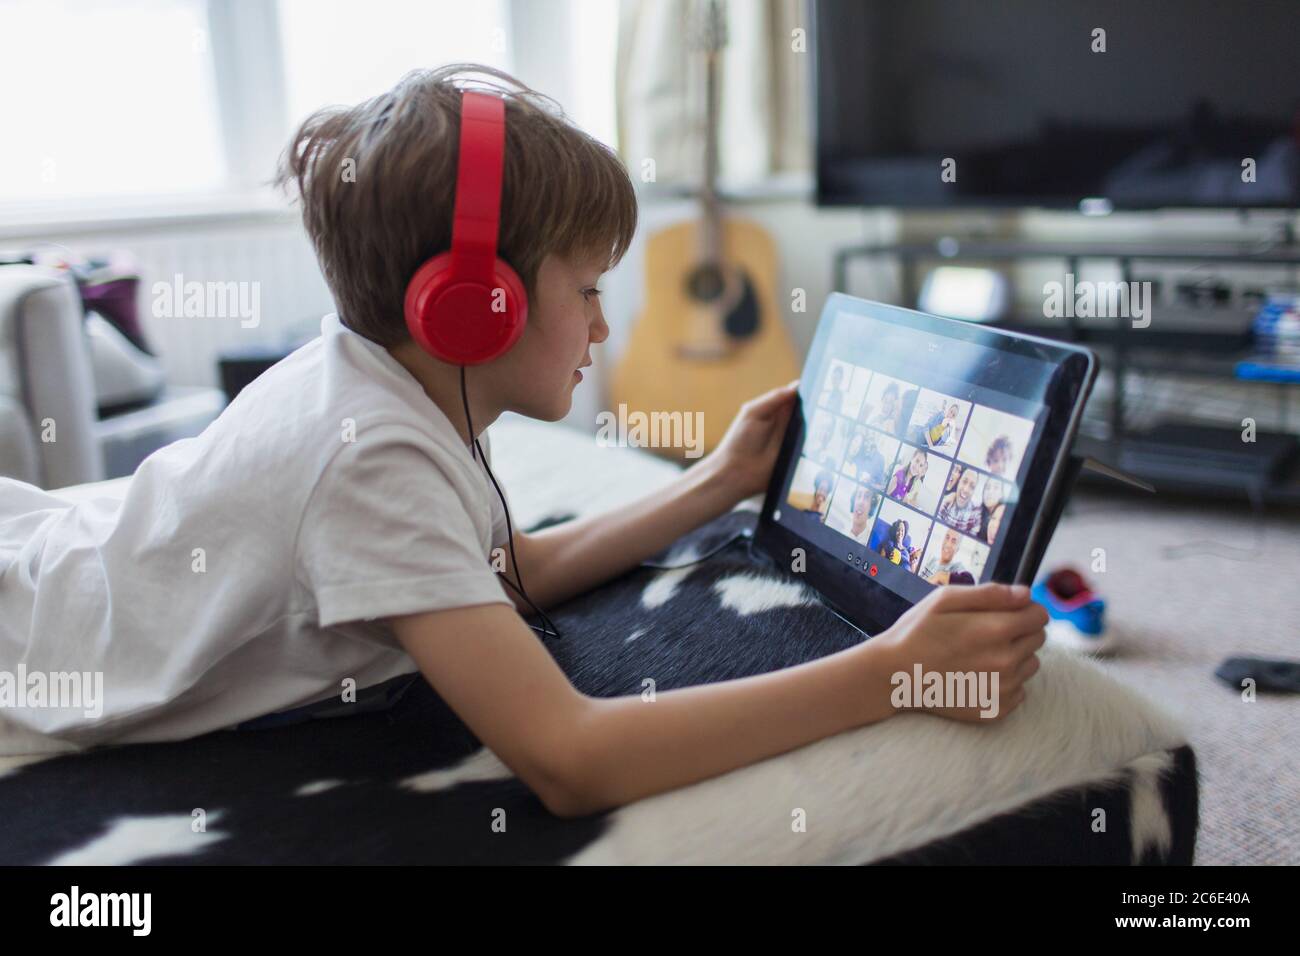 Boy with headphones and digital tablet homeschooling Stock Photo